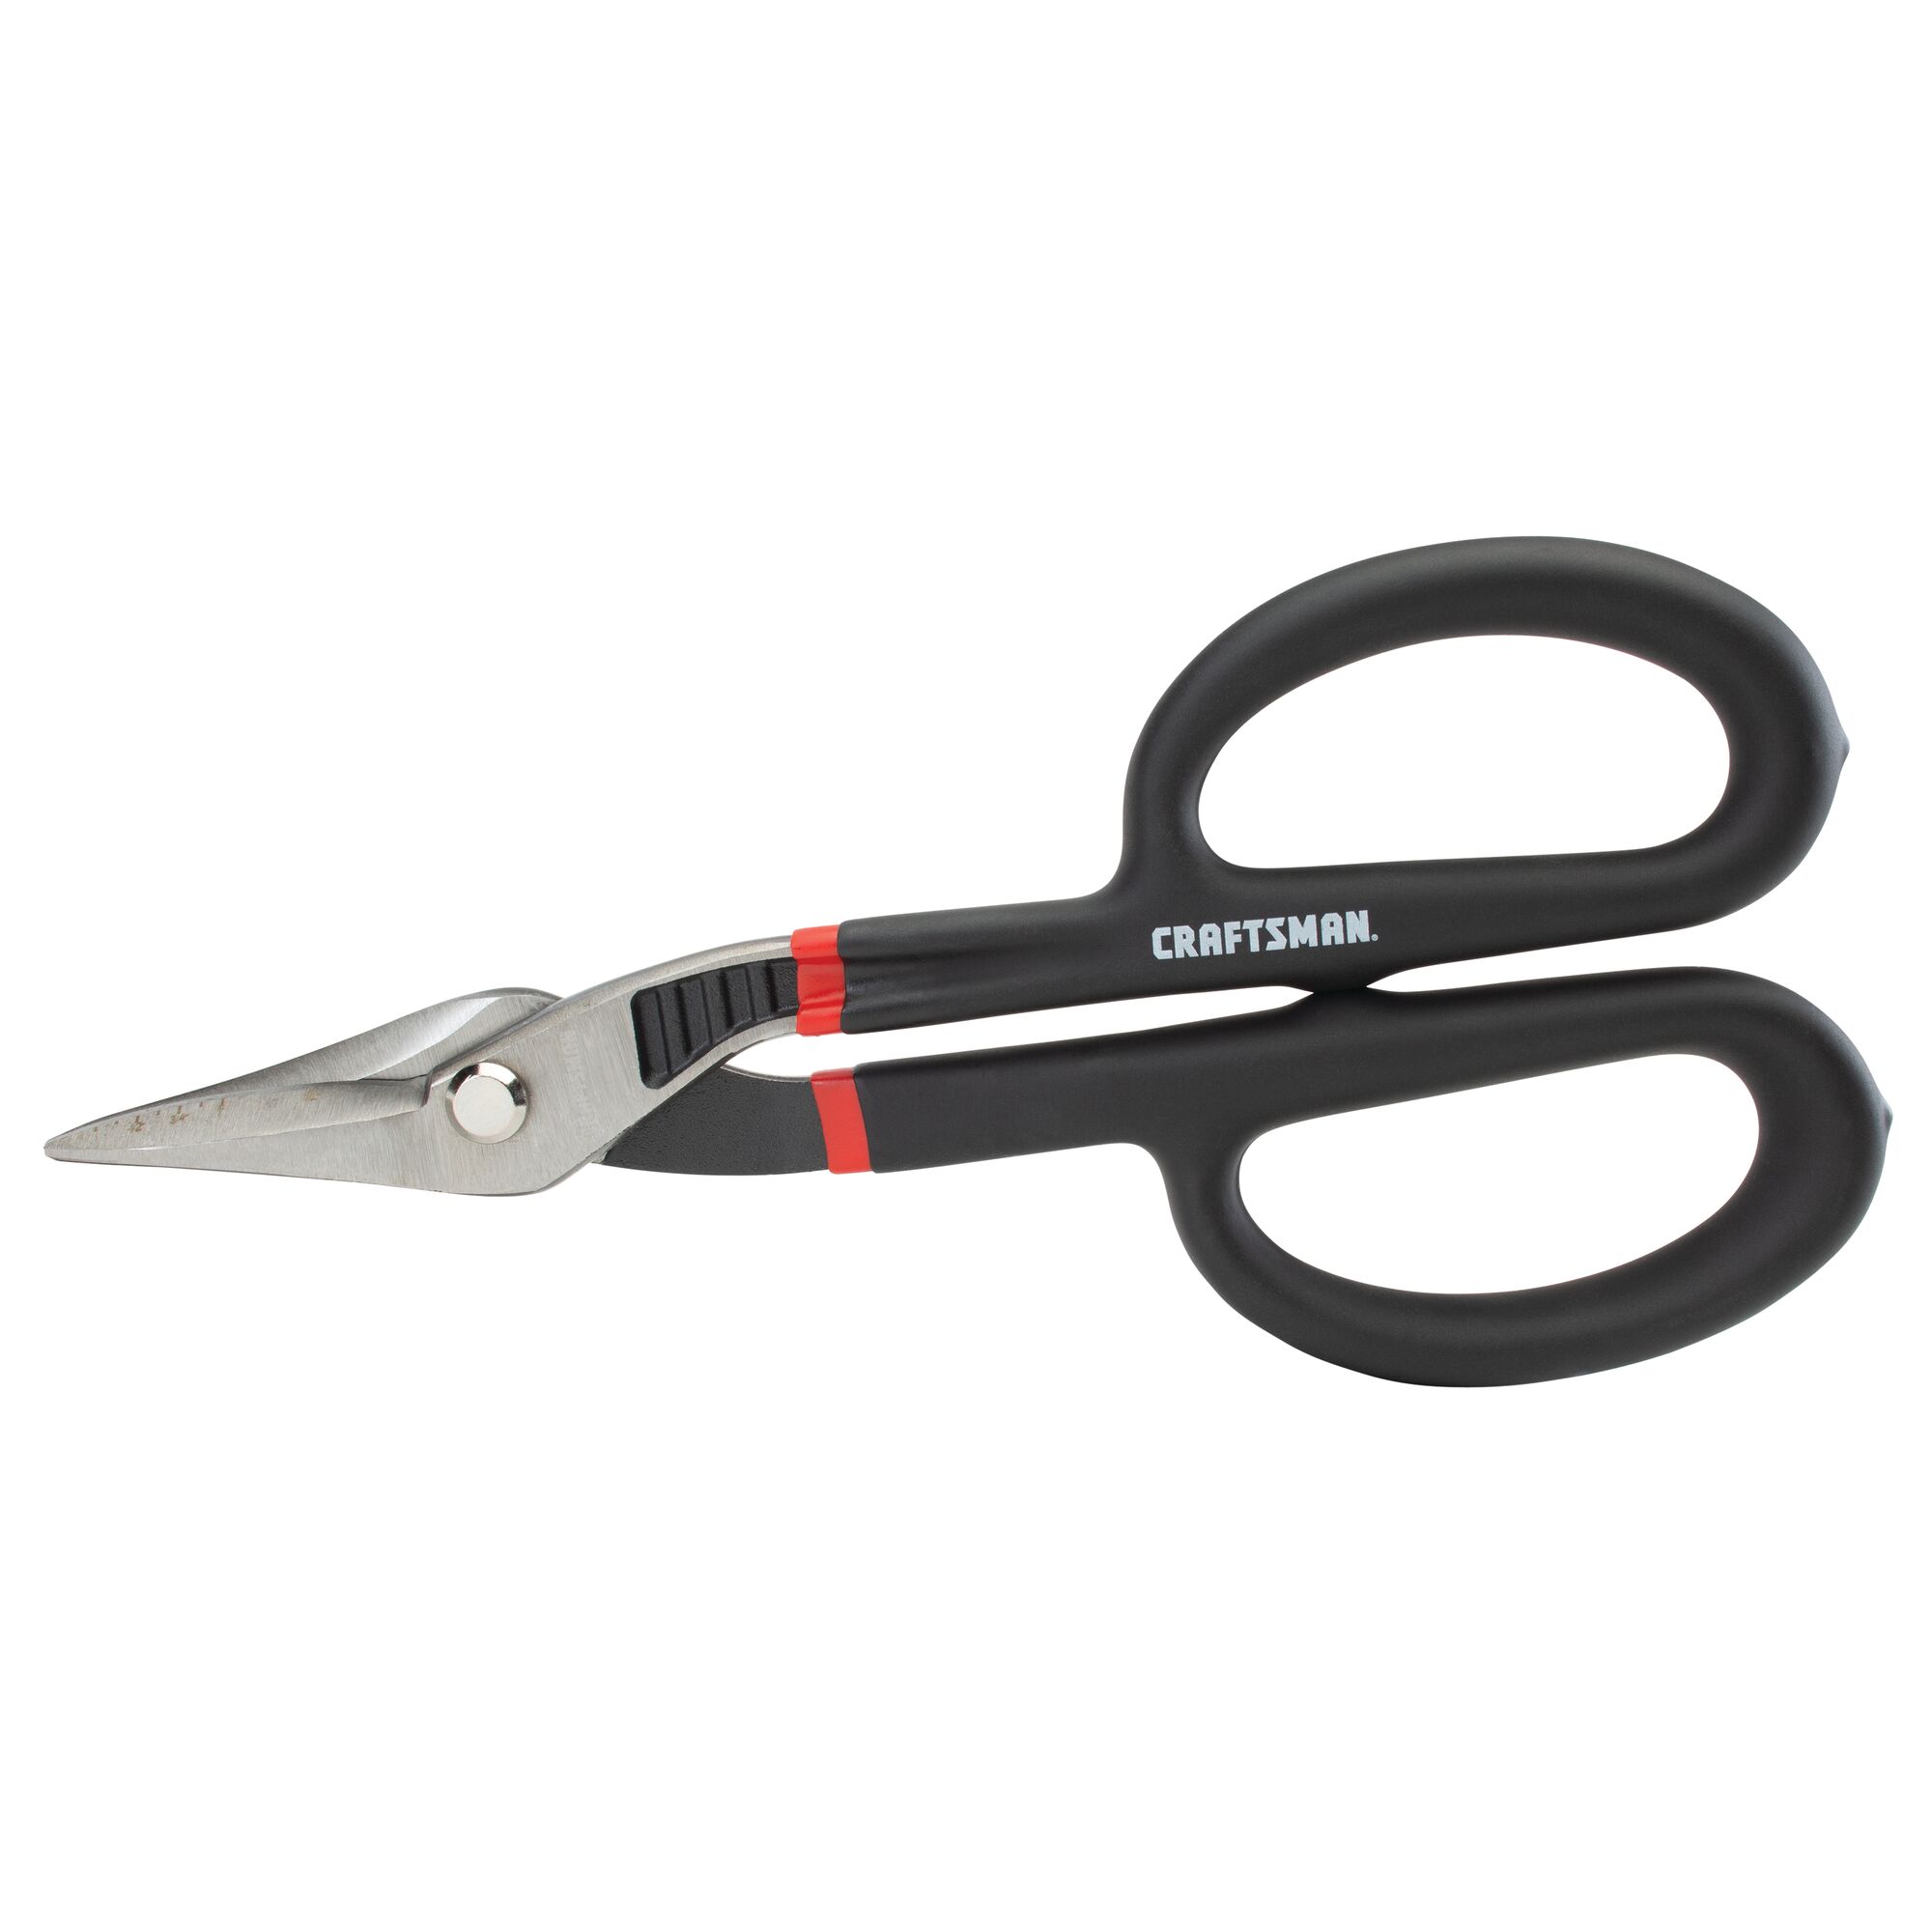 View of CRAFTSMAN Snips on white background